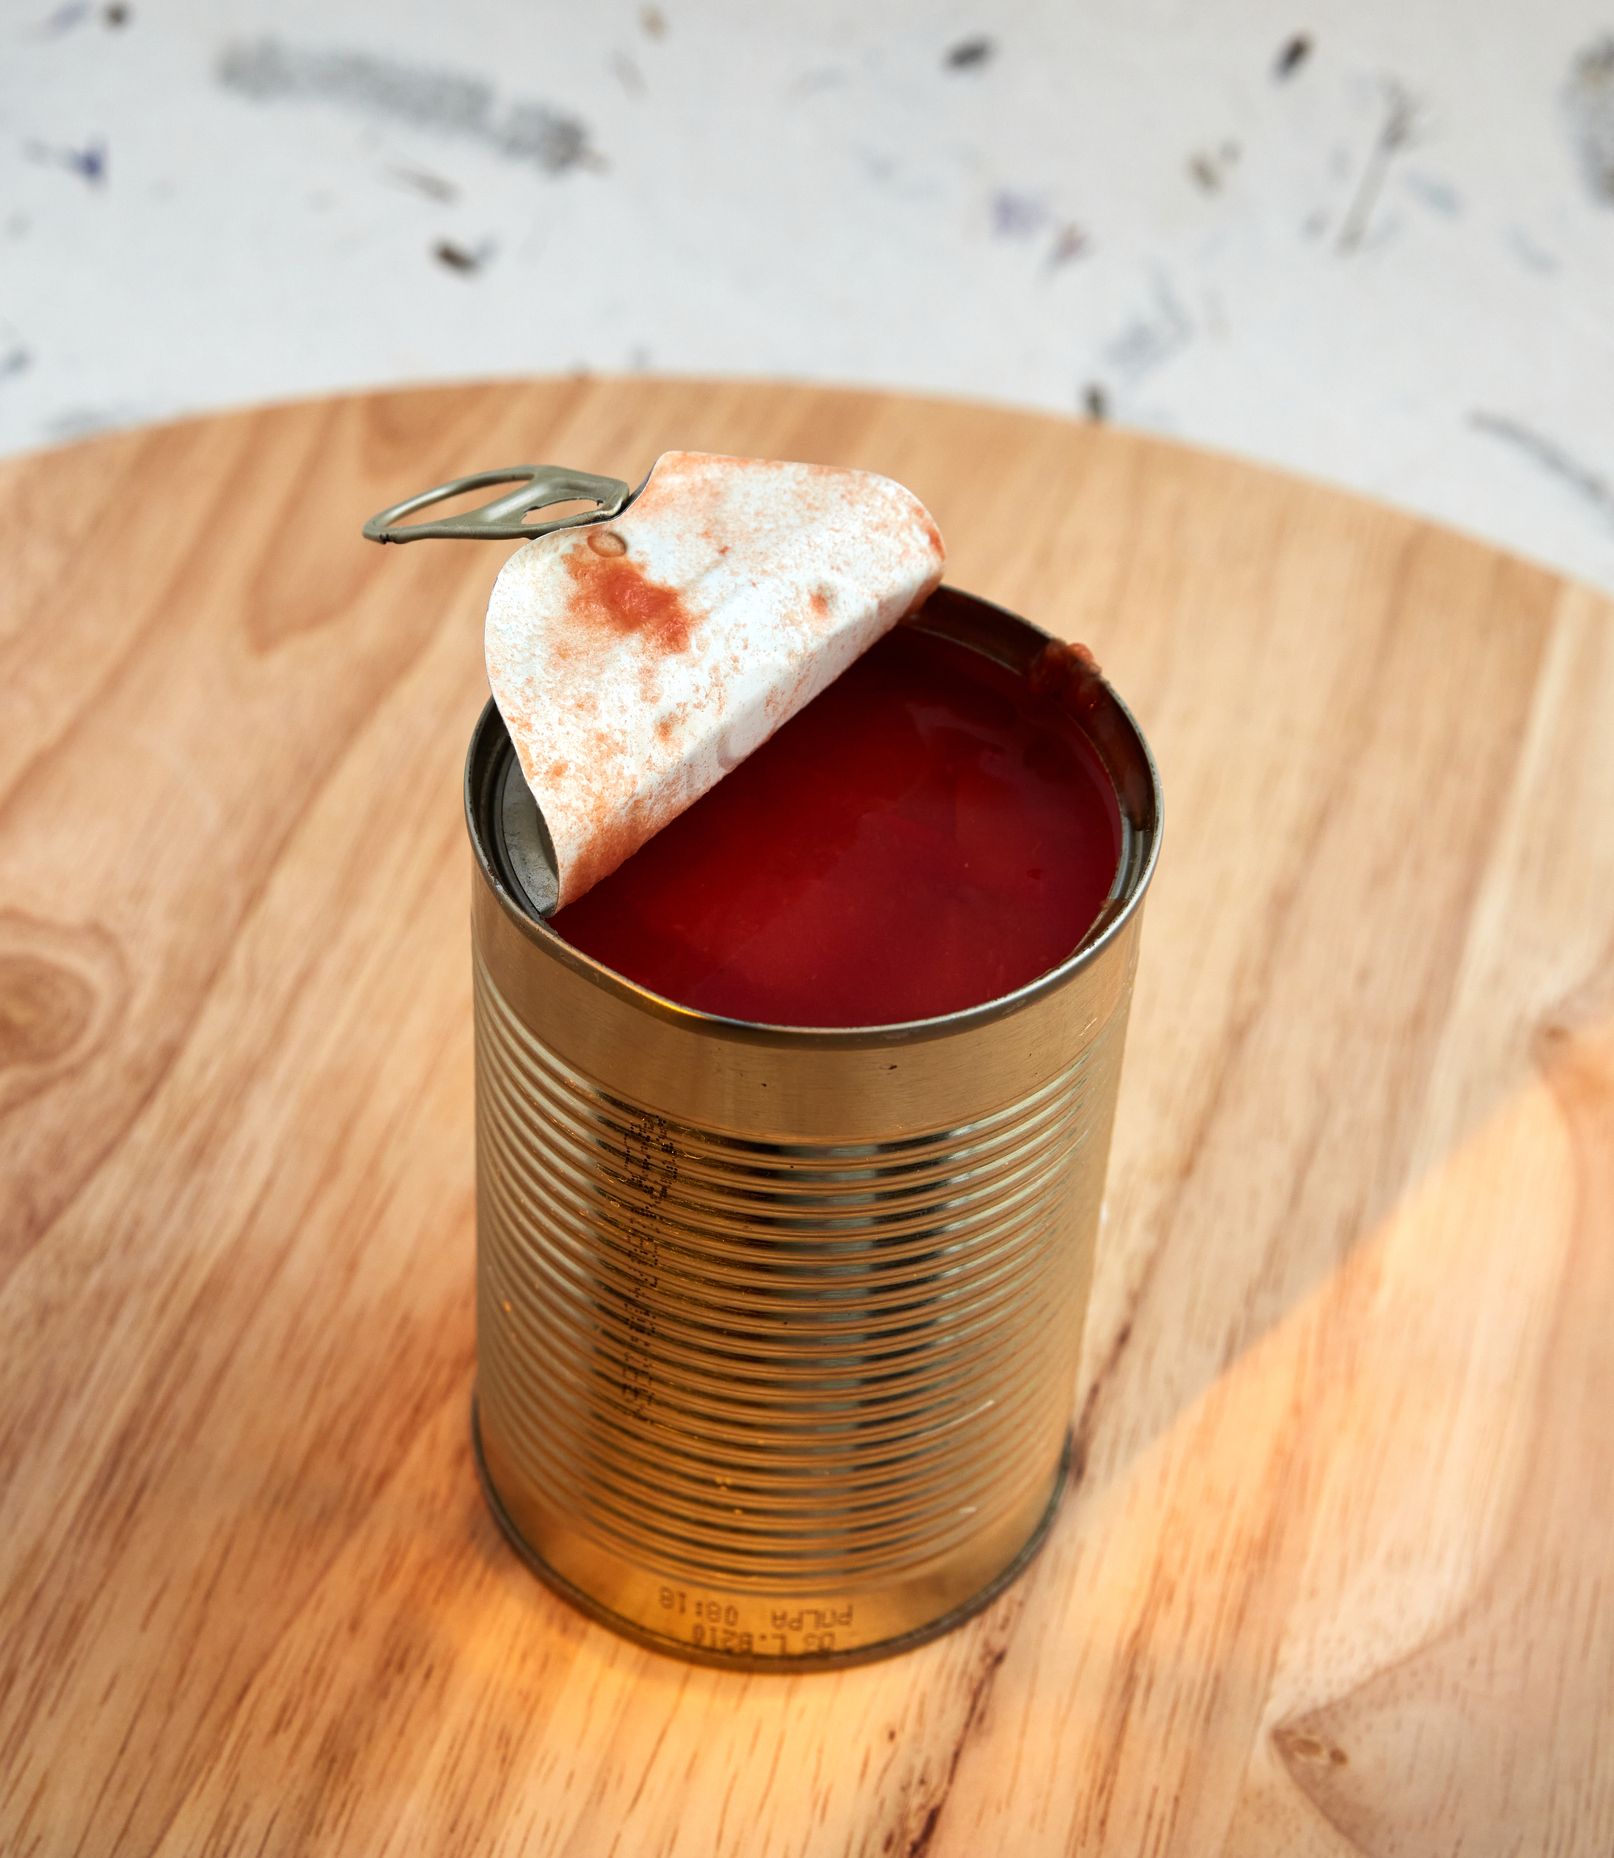 Is It Okay to Eat Expired Canned Food?